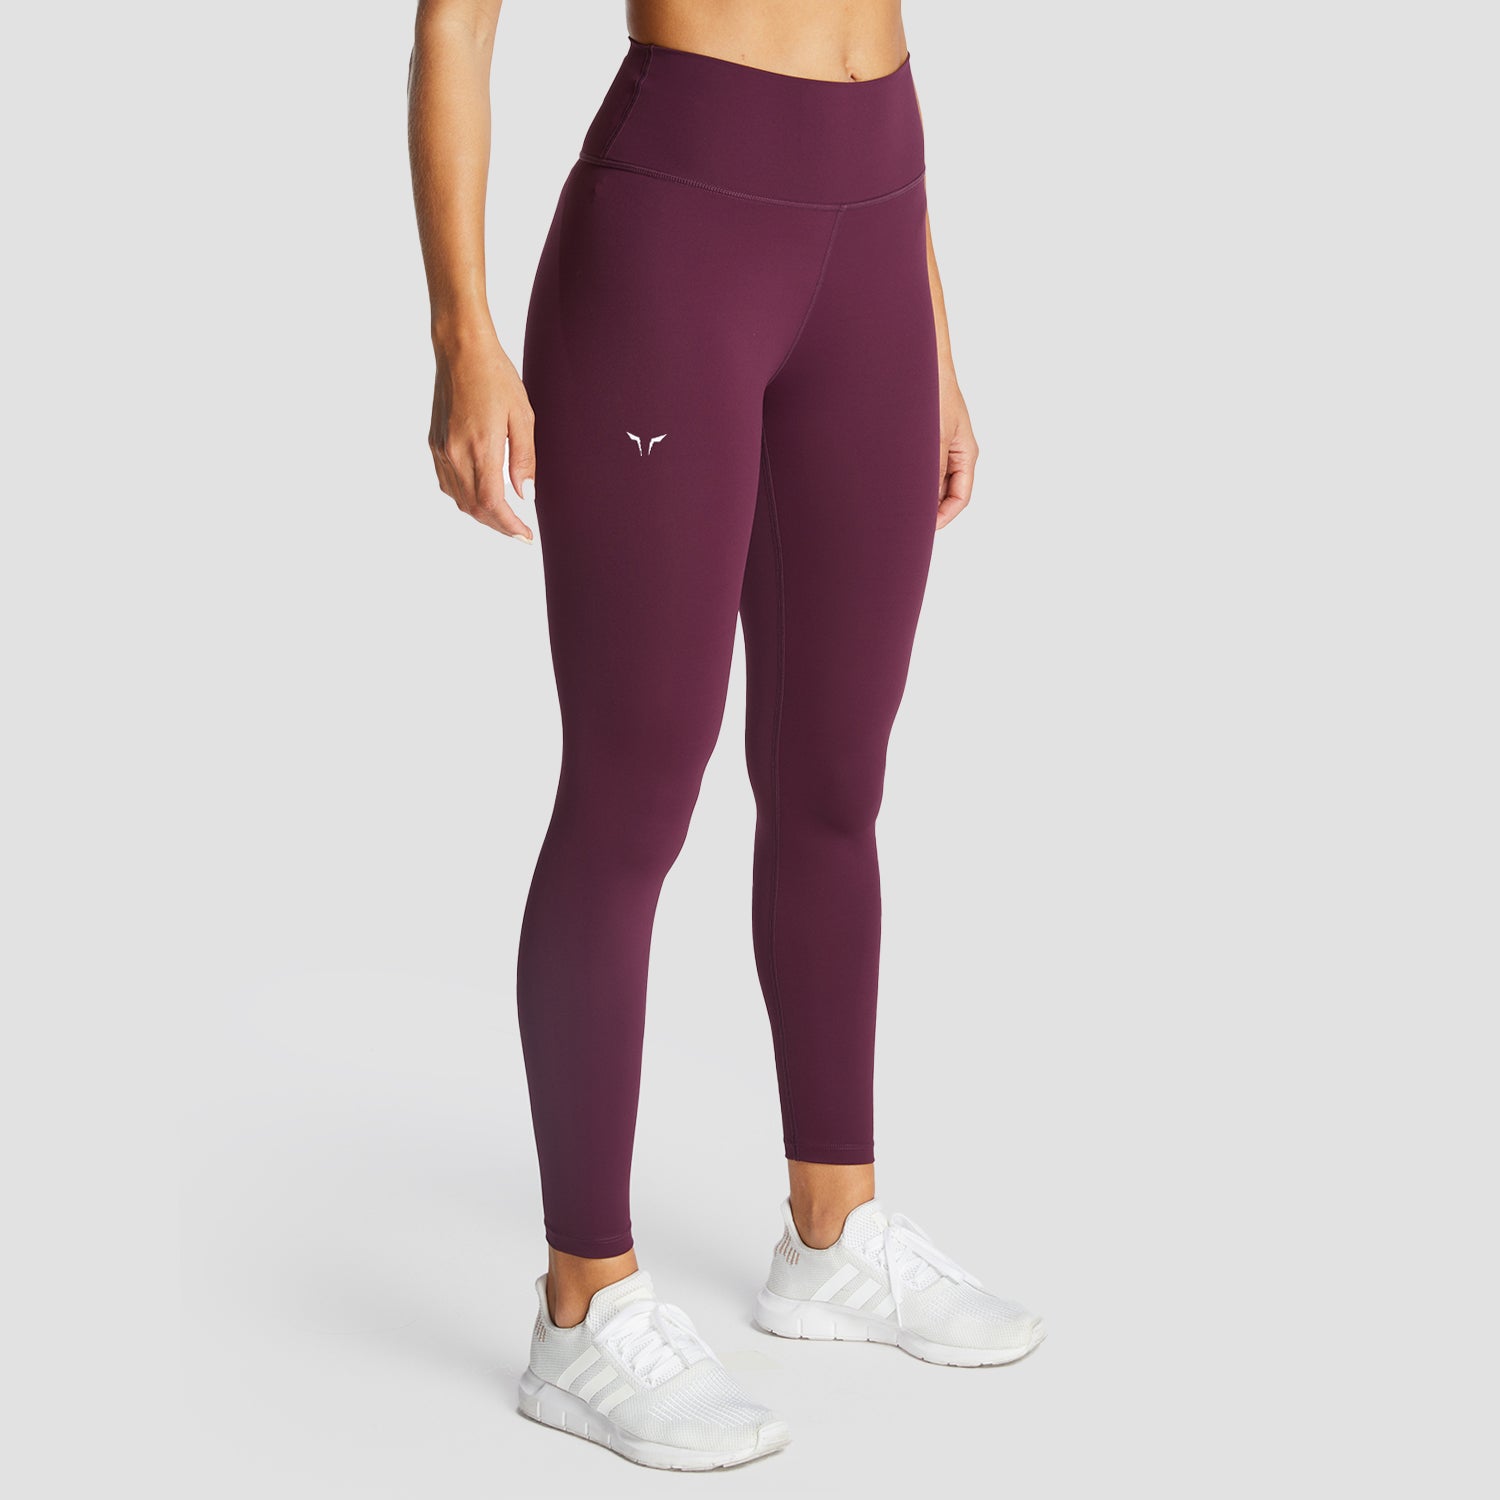 squatwolf-workout-clothes-womens-fitness-7-8-leggings-purple-gym-leggings-for-women